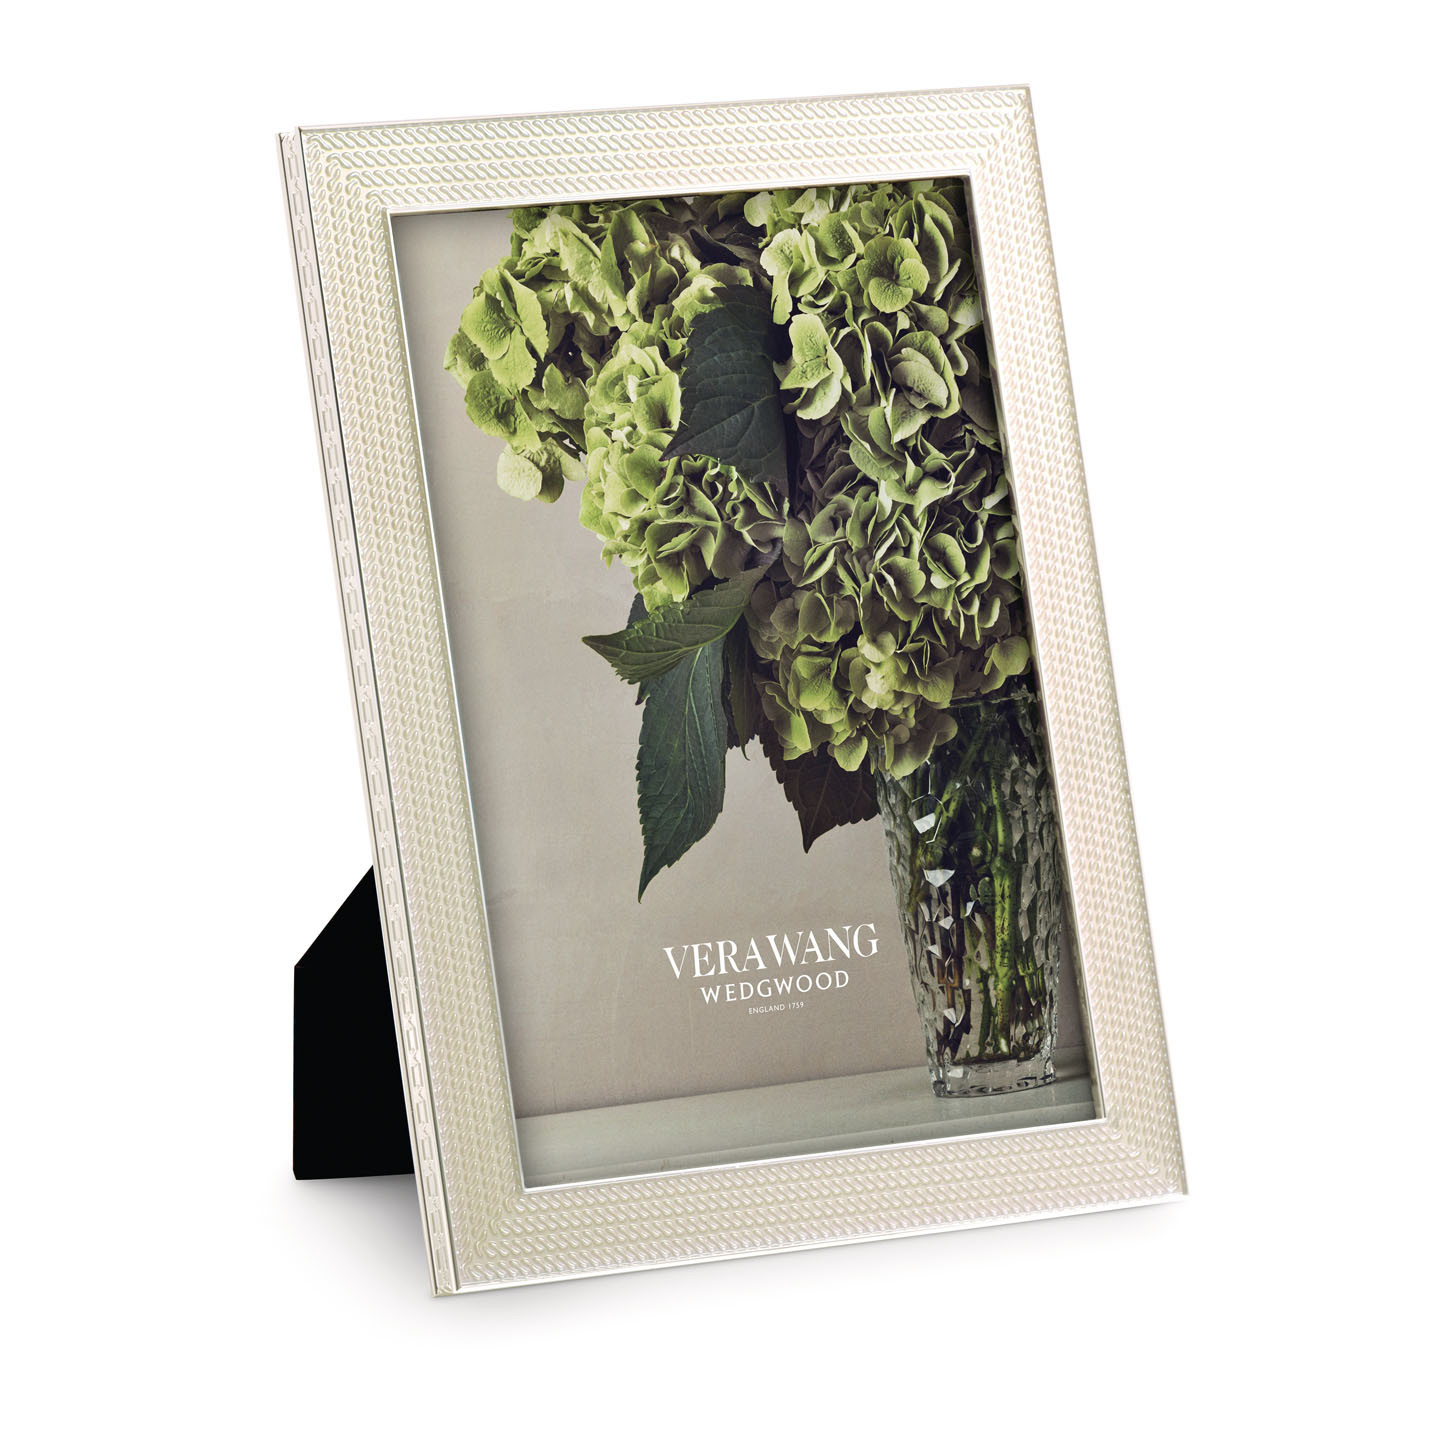 25 Awesome Waterford Marquis Sweet Memories Vase 2024 free download waterford marquis sweet memories vase of vera wang with love nouveau pearl photo frame photo 5x7inch inside vera wang with love nouveau pearl photo frame photo 5x7inch wedgwooda uk